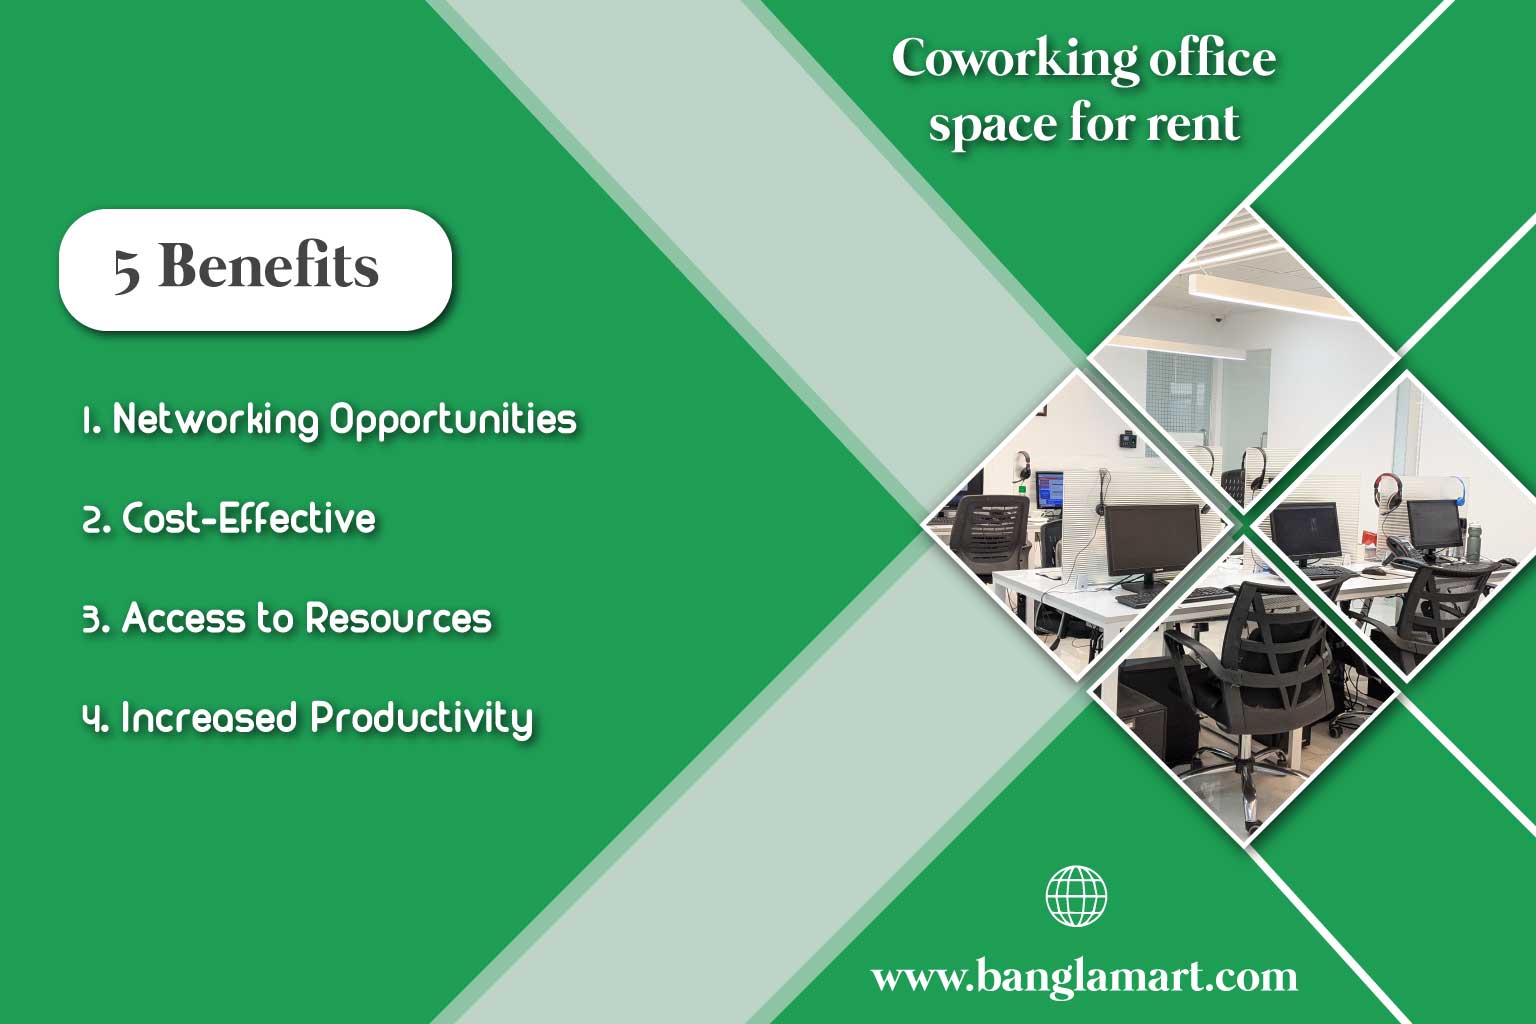 coworking office space for rent